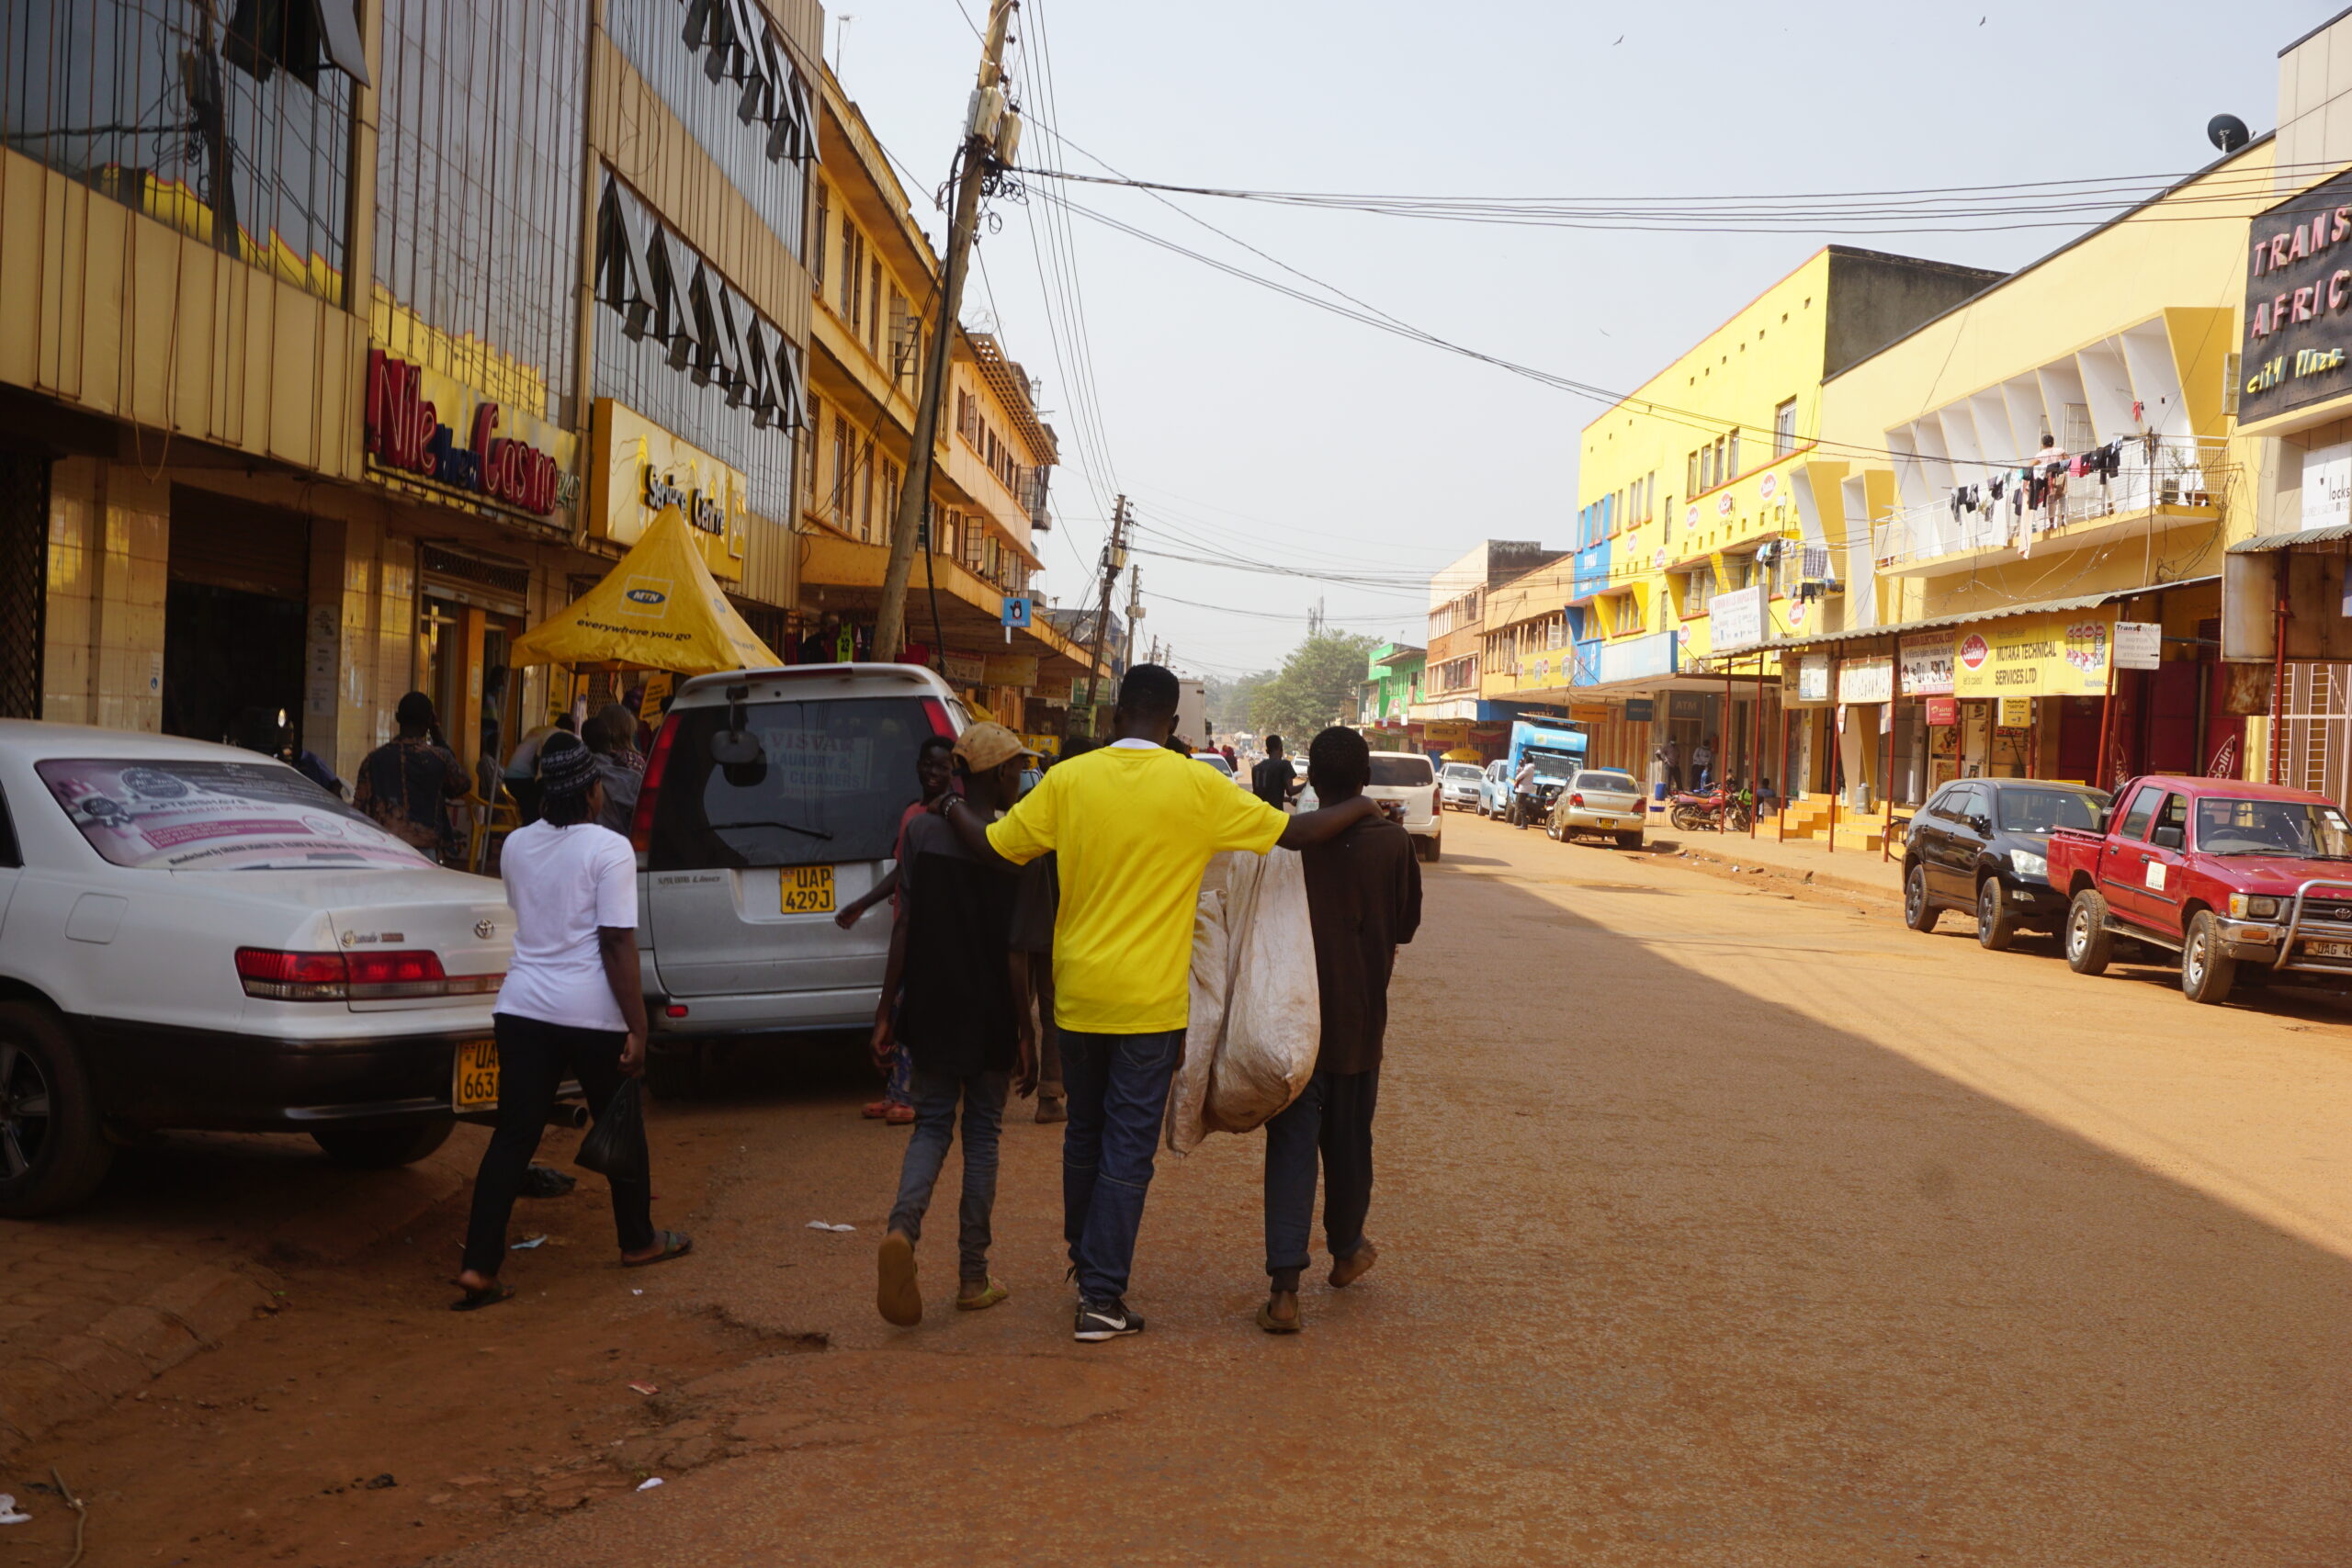 A man wearing S.A.L.V.E's yellow tshirt walks down a street with a group of boys